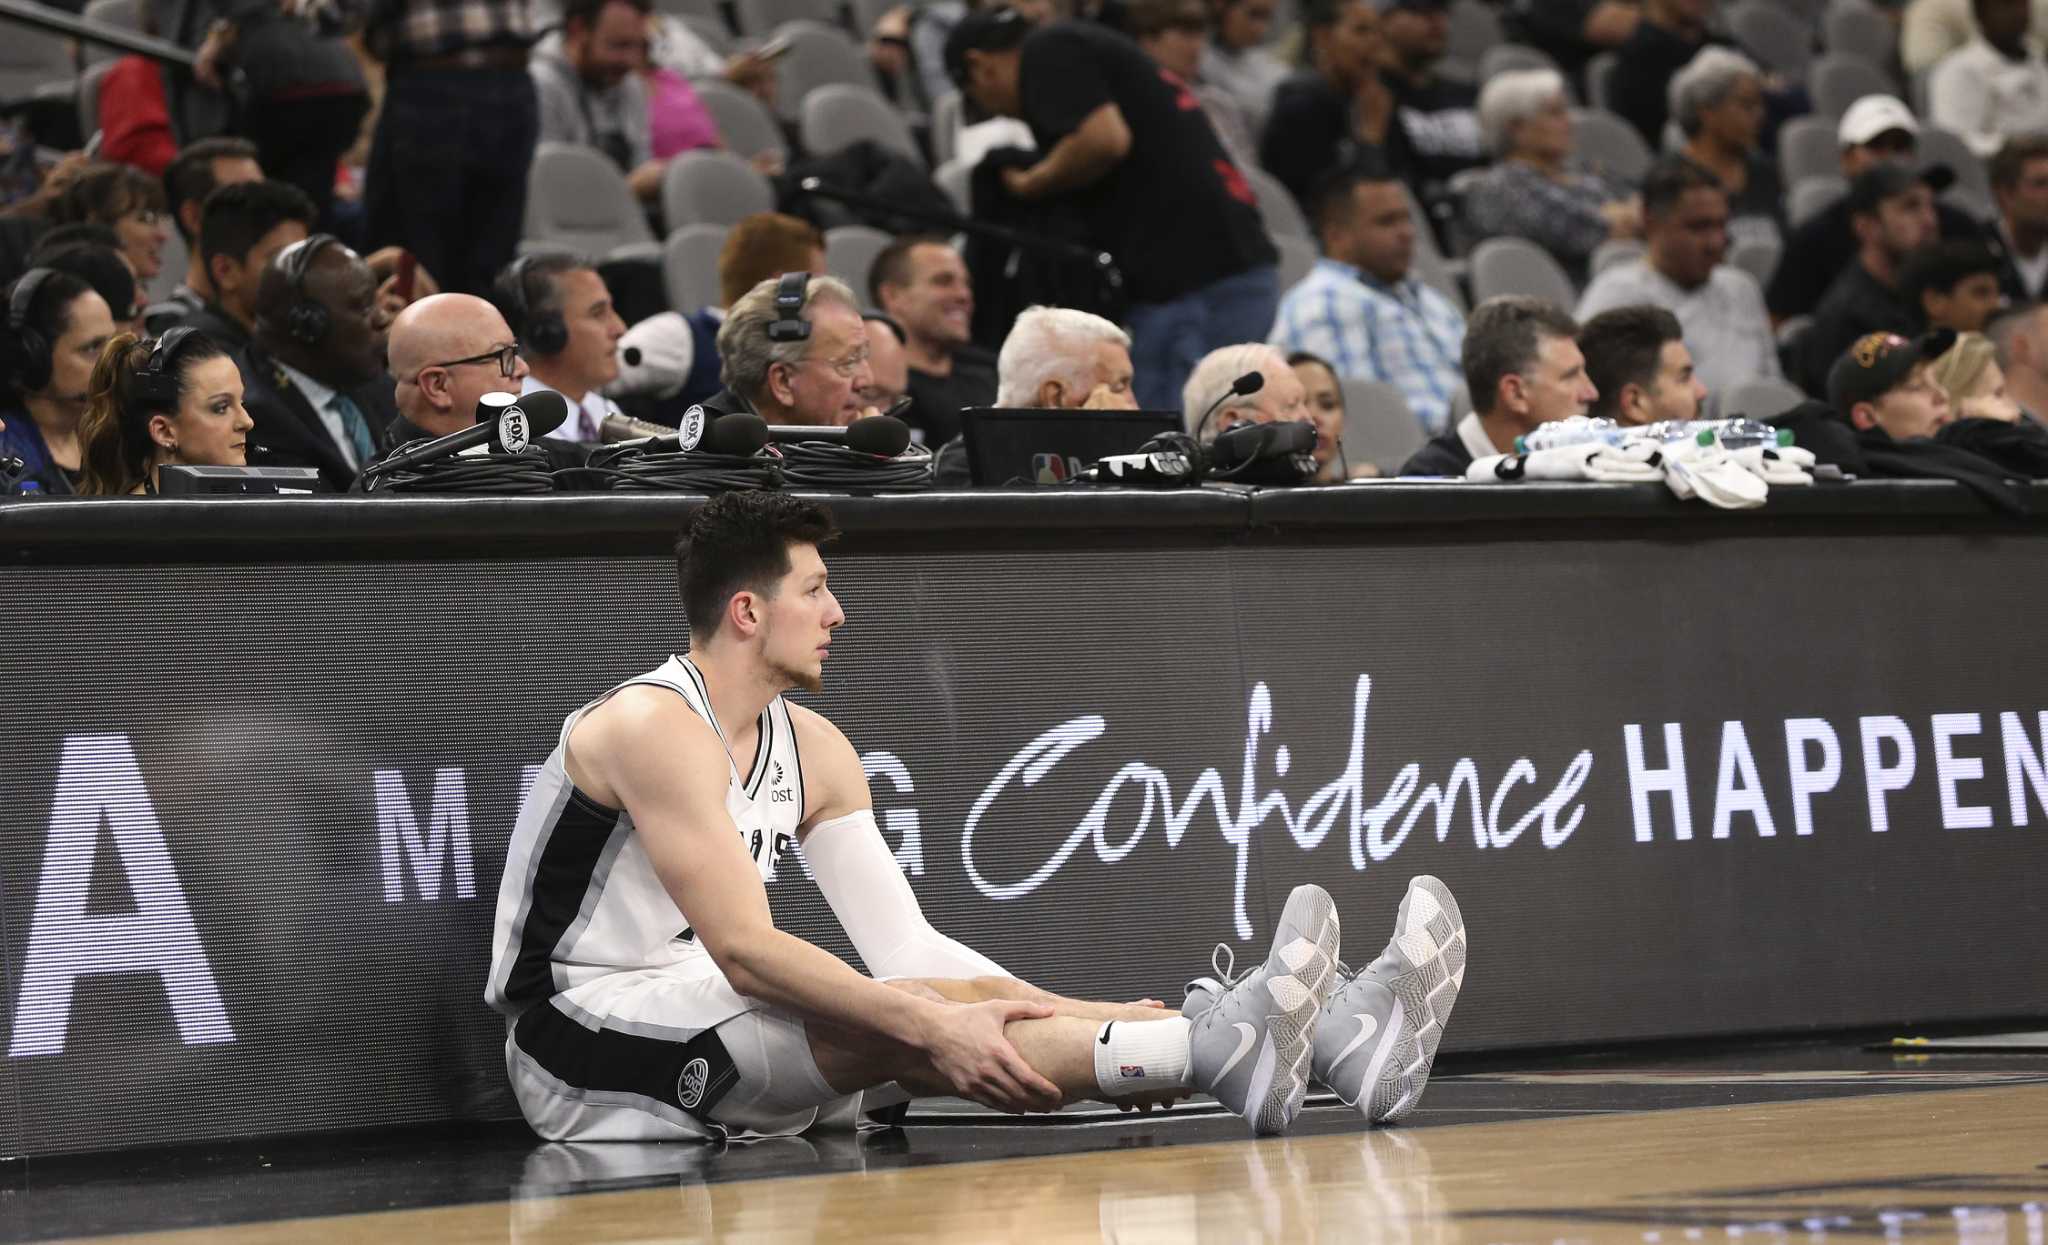 The ace is at home: How the Spurs' Drew Eubanks went from baseball prospect  to NBA contract